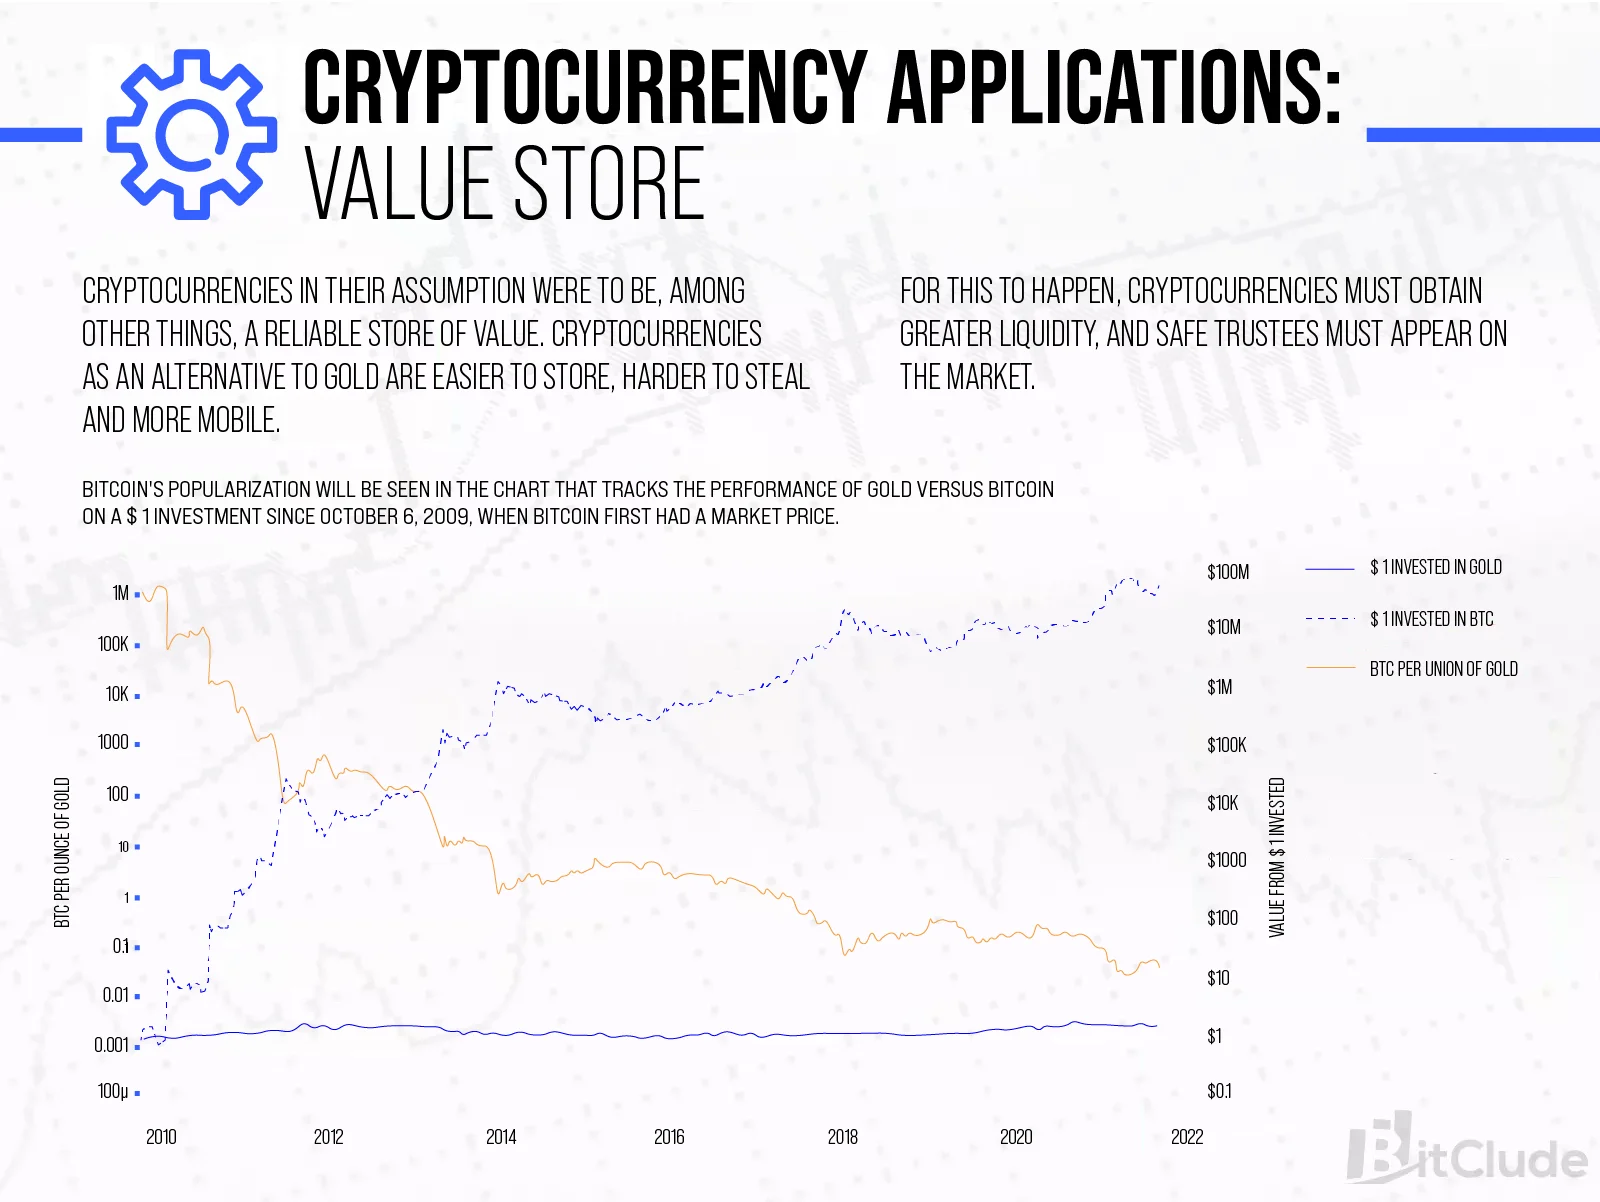 Cryptocurrencies are great as a store of value, image shows comparison of Bitcoin and Gold prices since 2009 to 2021.